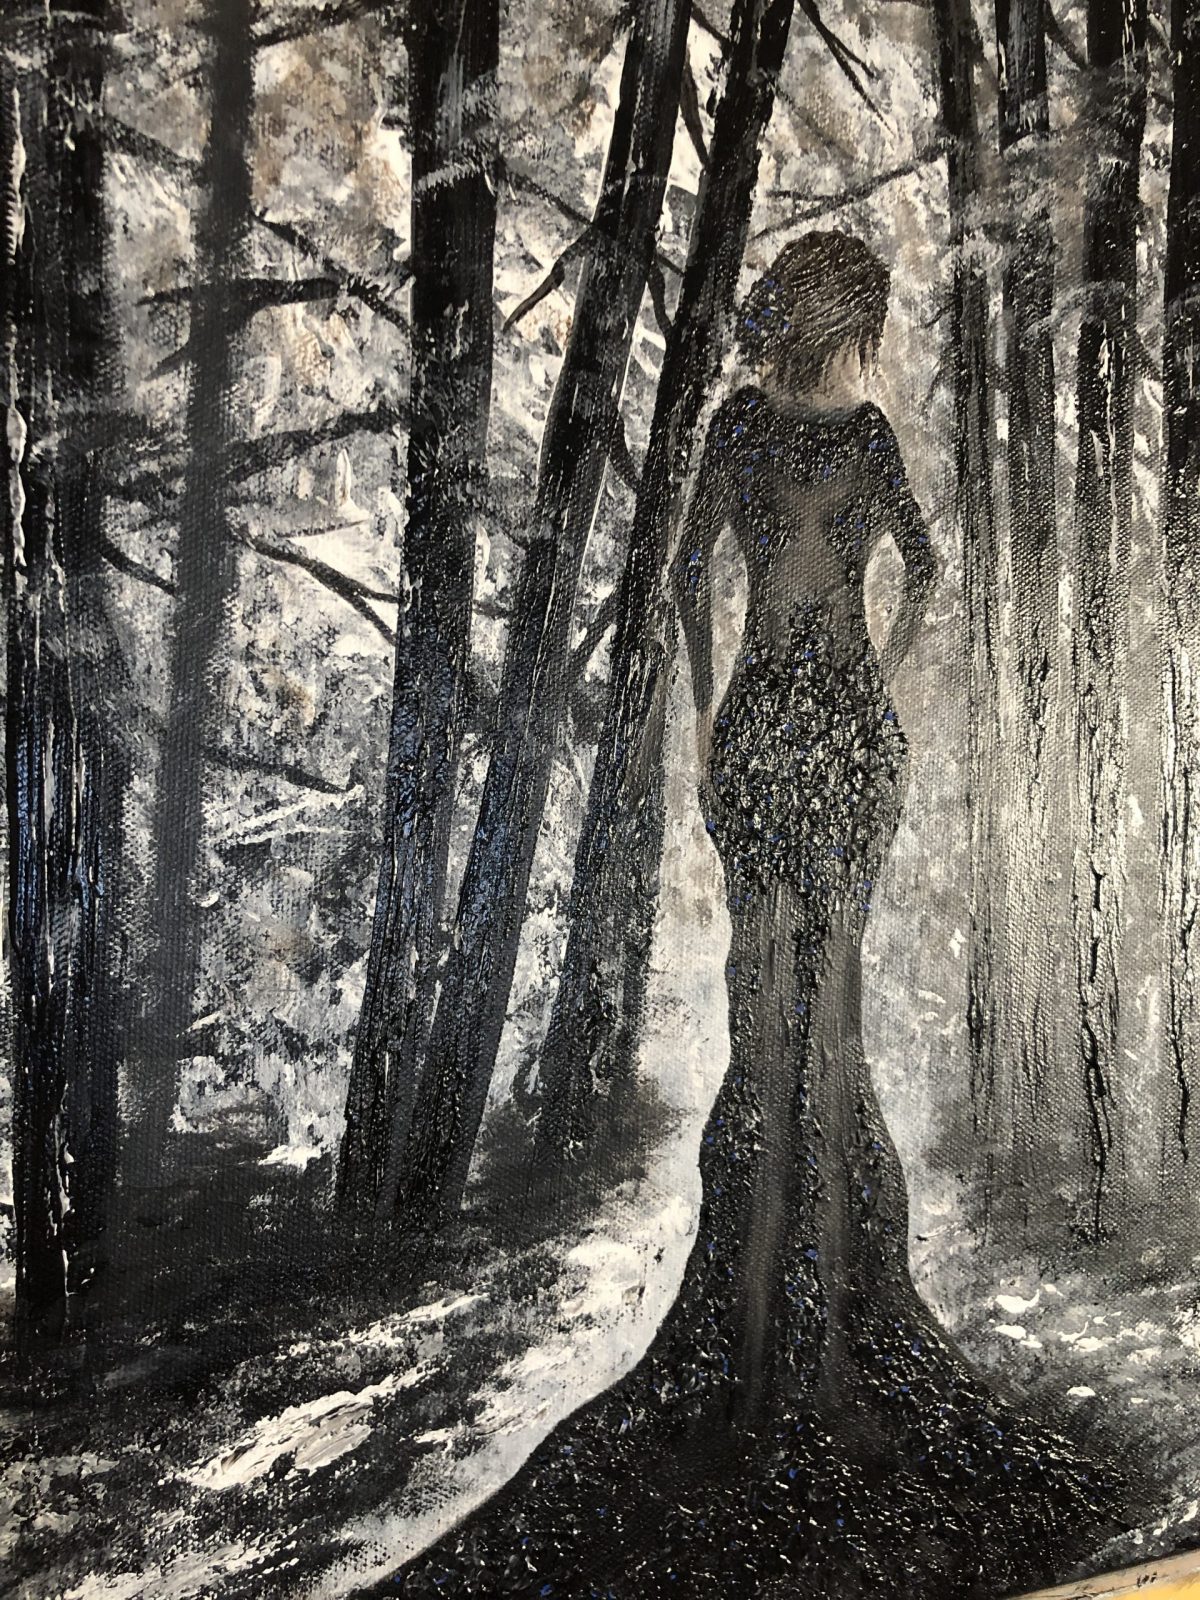 &quot;The black widow&quot; the shot of the woman going into the forest - The black widow - acrylic painting made with a knife presenting a black widow entering a forest in black and white